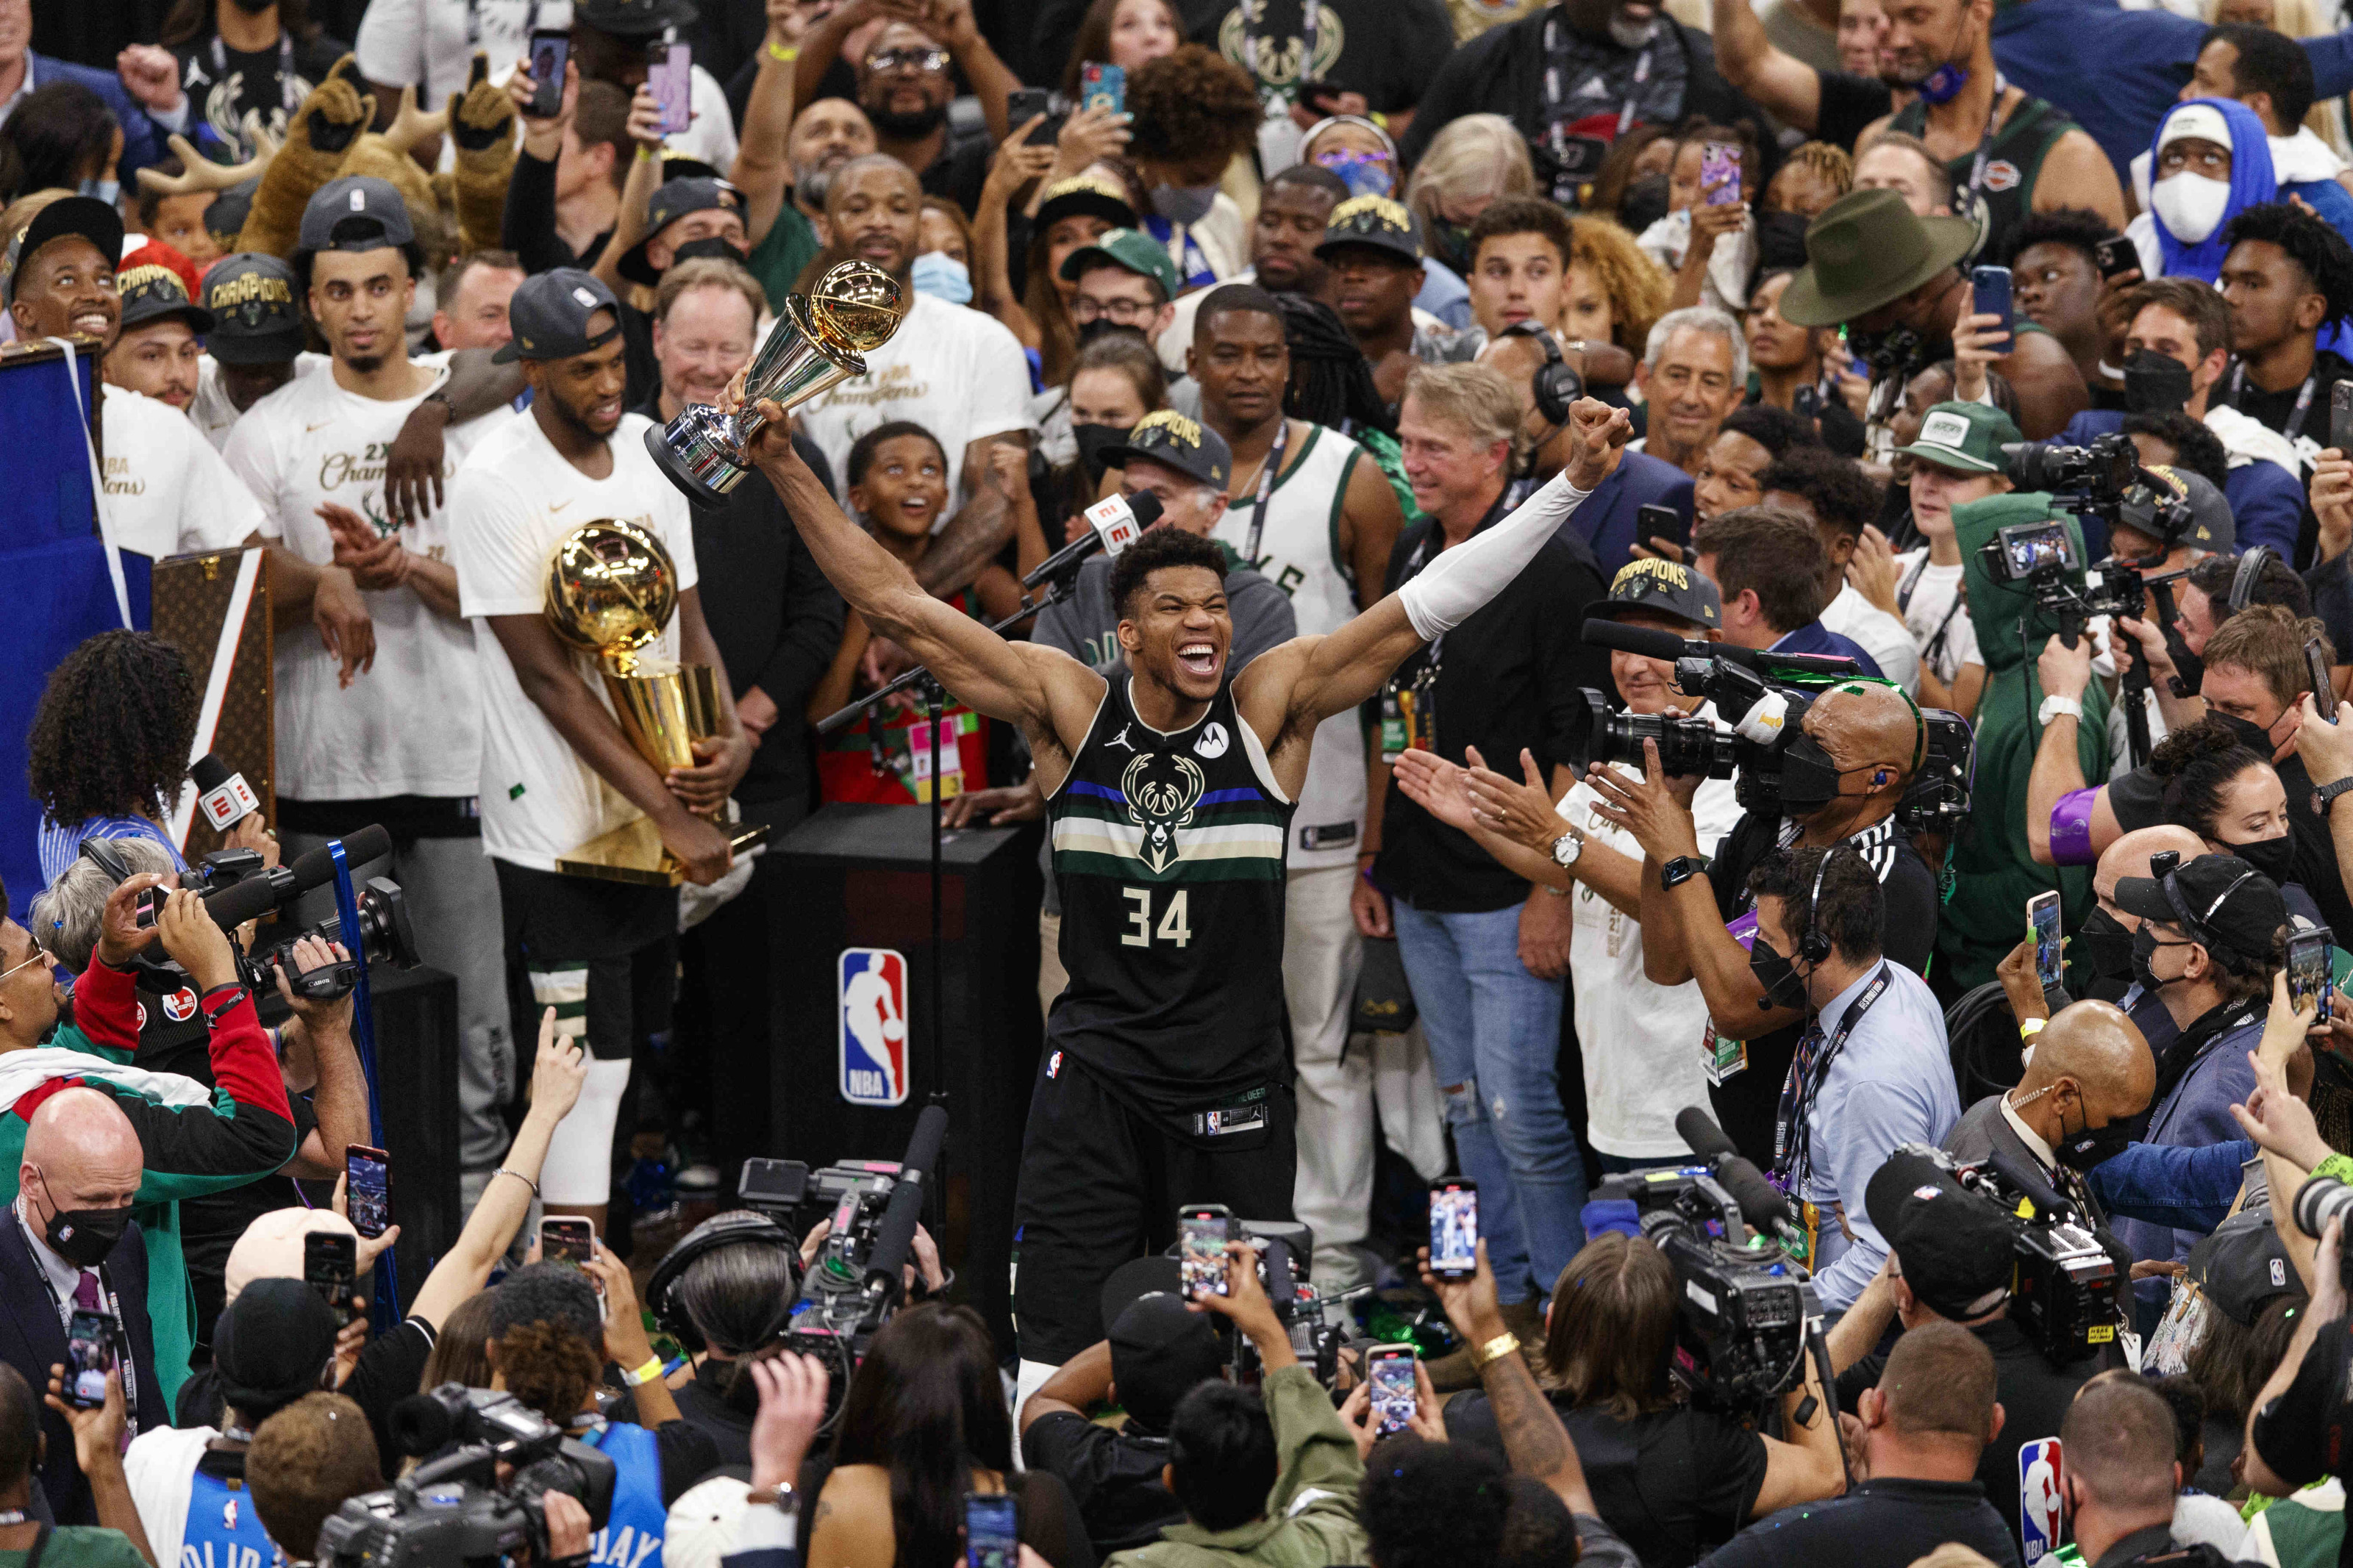 2017 NBA All-Star game: Giannis Antetokounmpo opens up on his rise